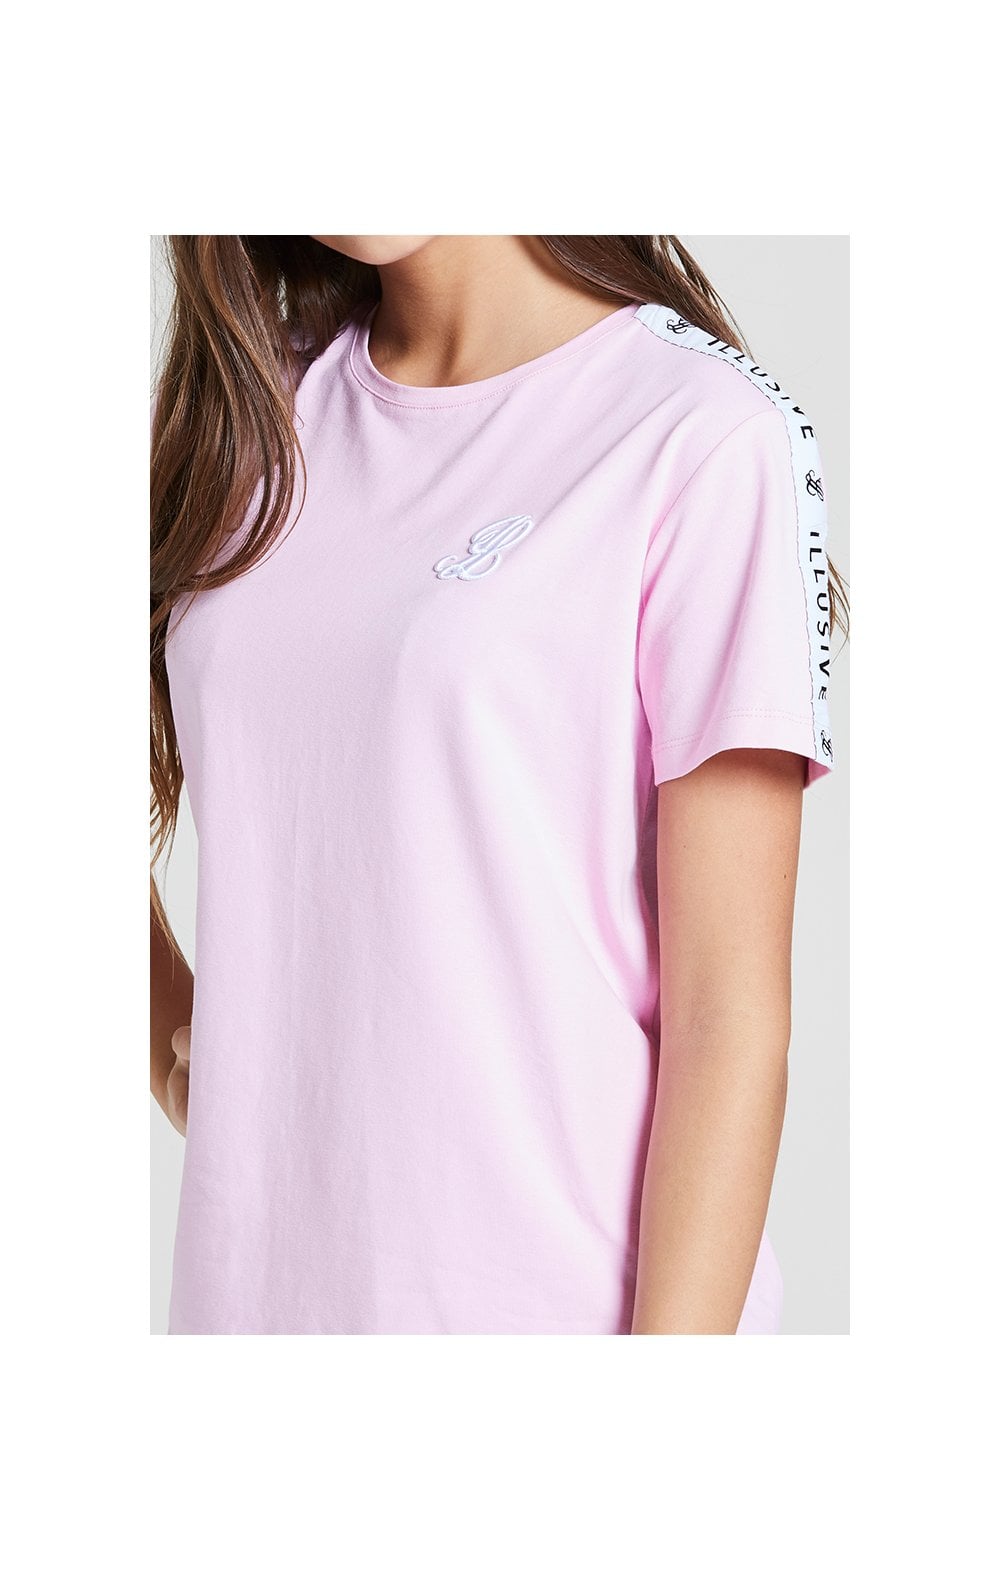 Load image into Gallery viewer, Illusive London BF Fit Taped Tee - Pink (1)